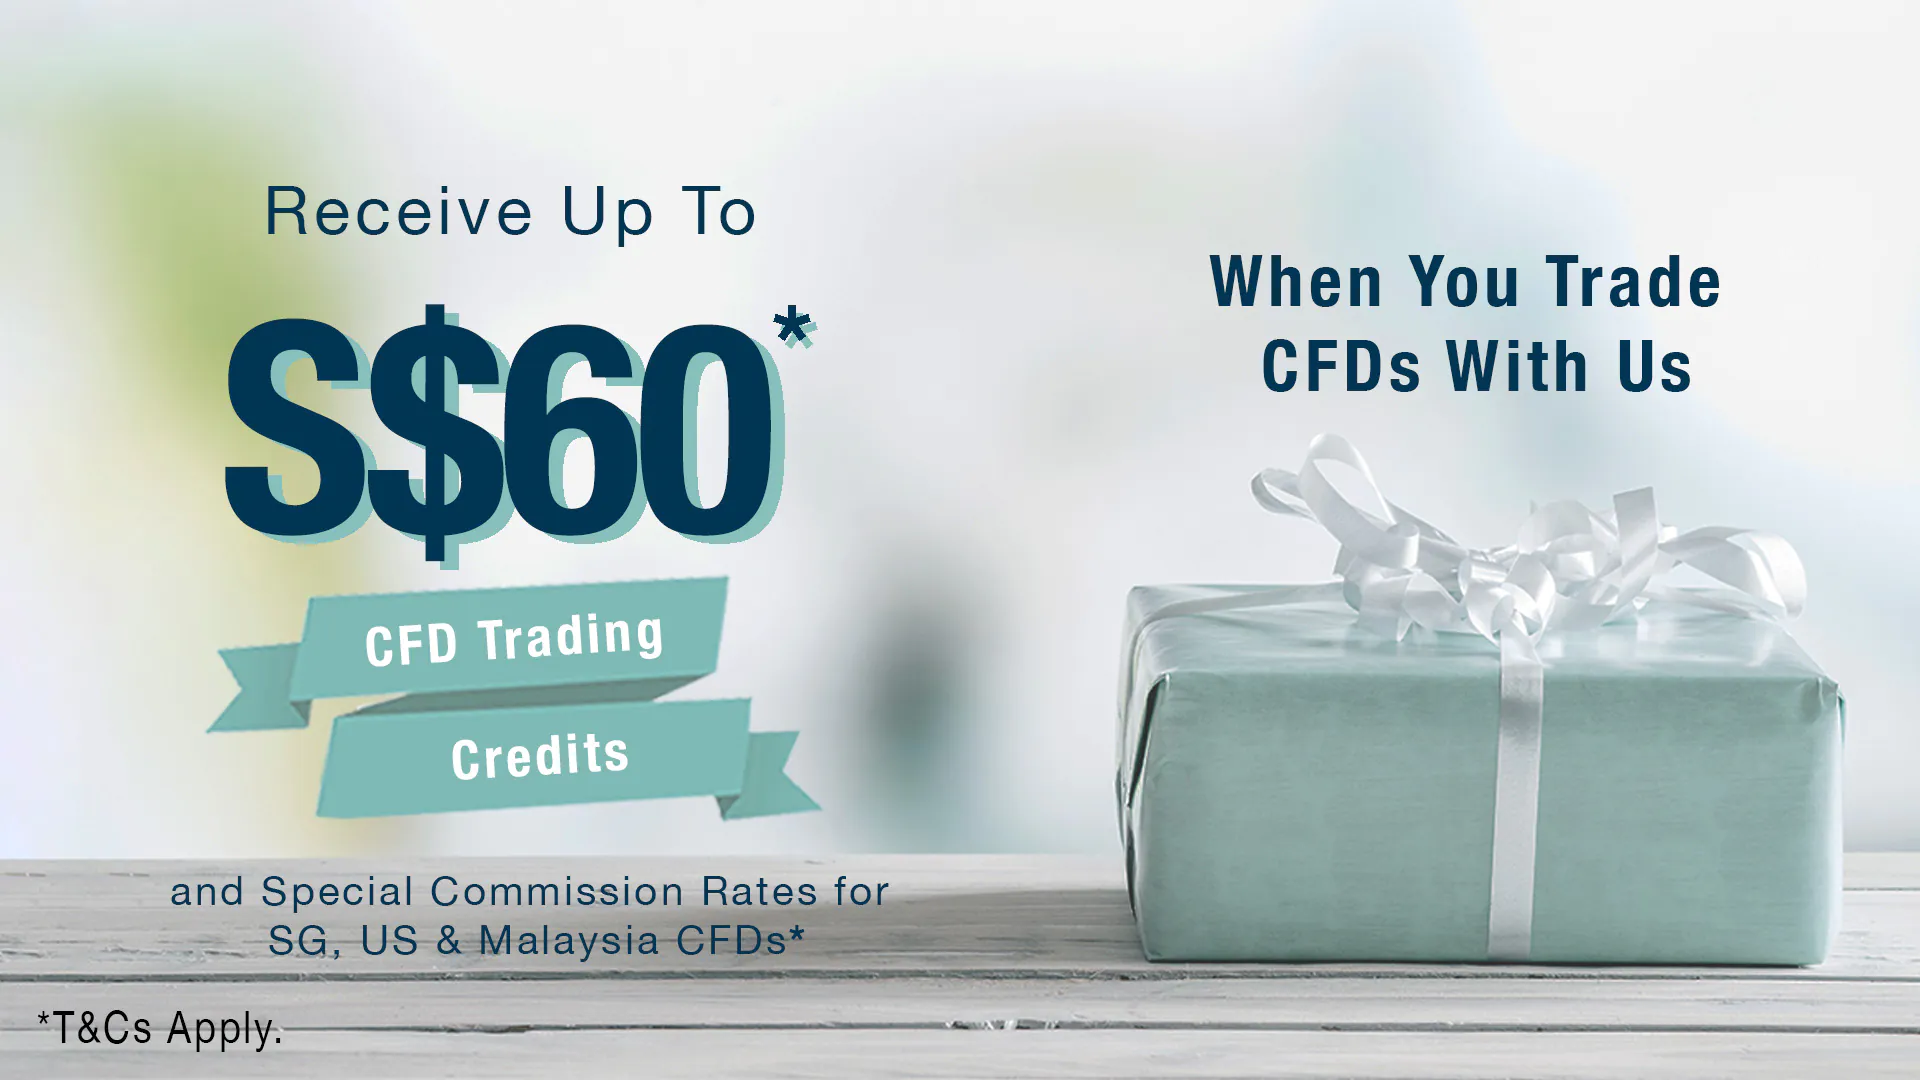 phillip cfd promotion